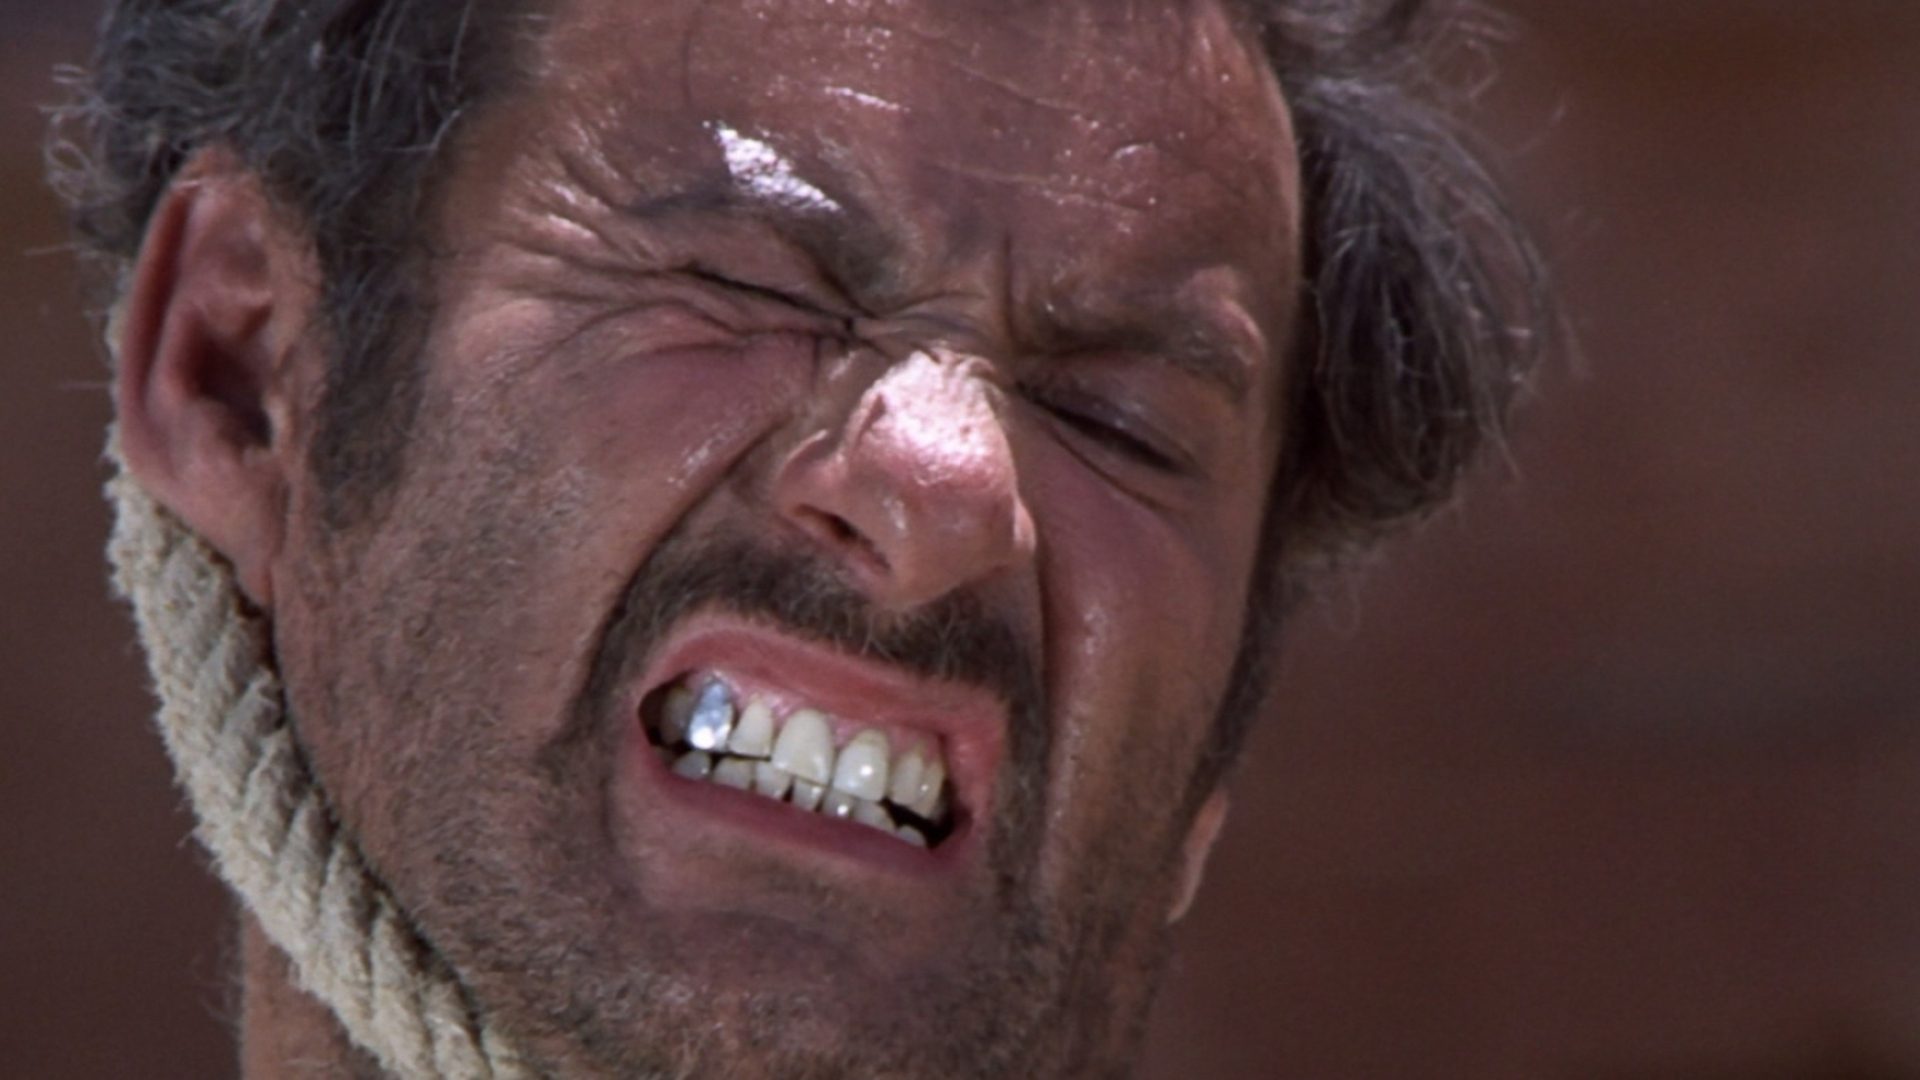 The Good, The Bad And The Ugly, Western-themed wallpaper, Clint Eastwood, Sergio Leone, 1920x1080 Full HD Desktop